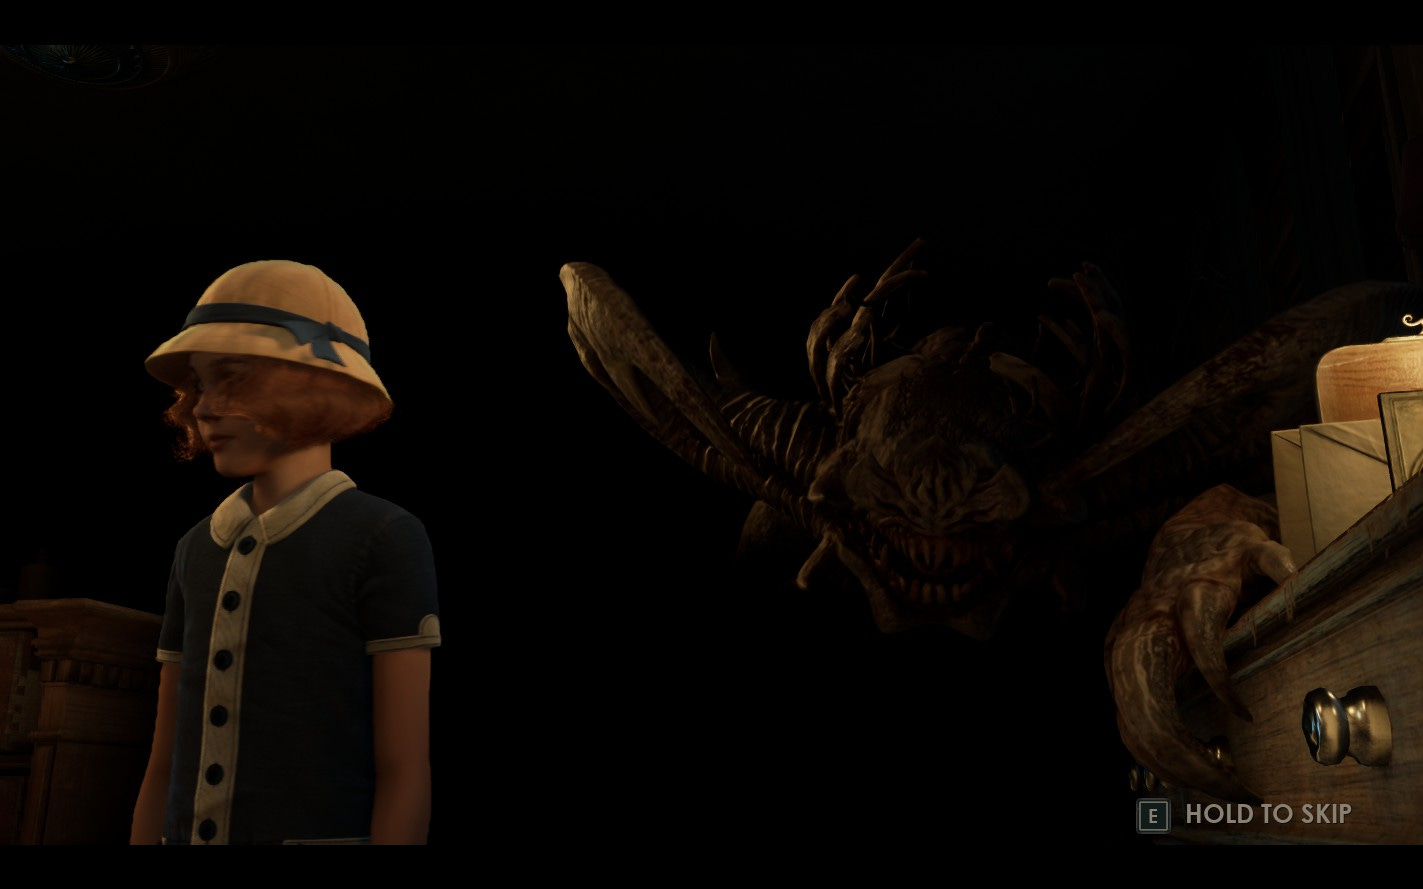 A screenshot of the game Alone in the Dark (2024 reboot) showing a large monster coming out of the darkness behind a girl on the left.